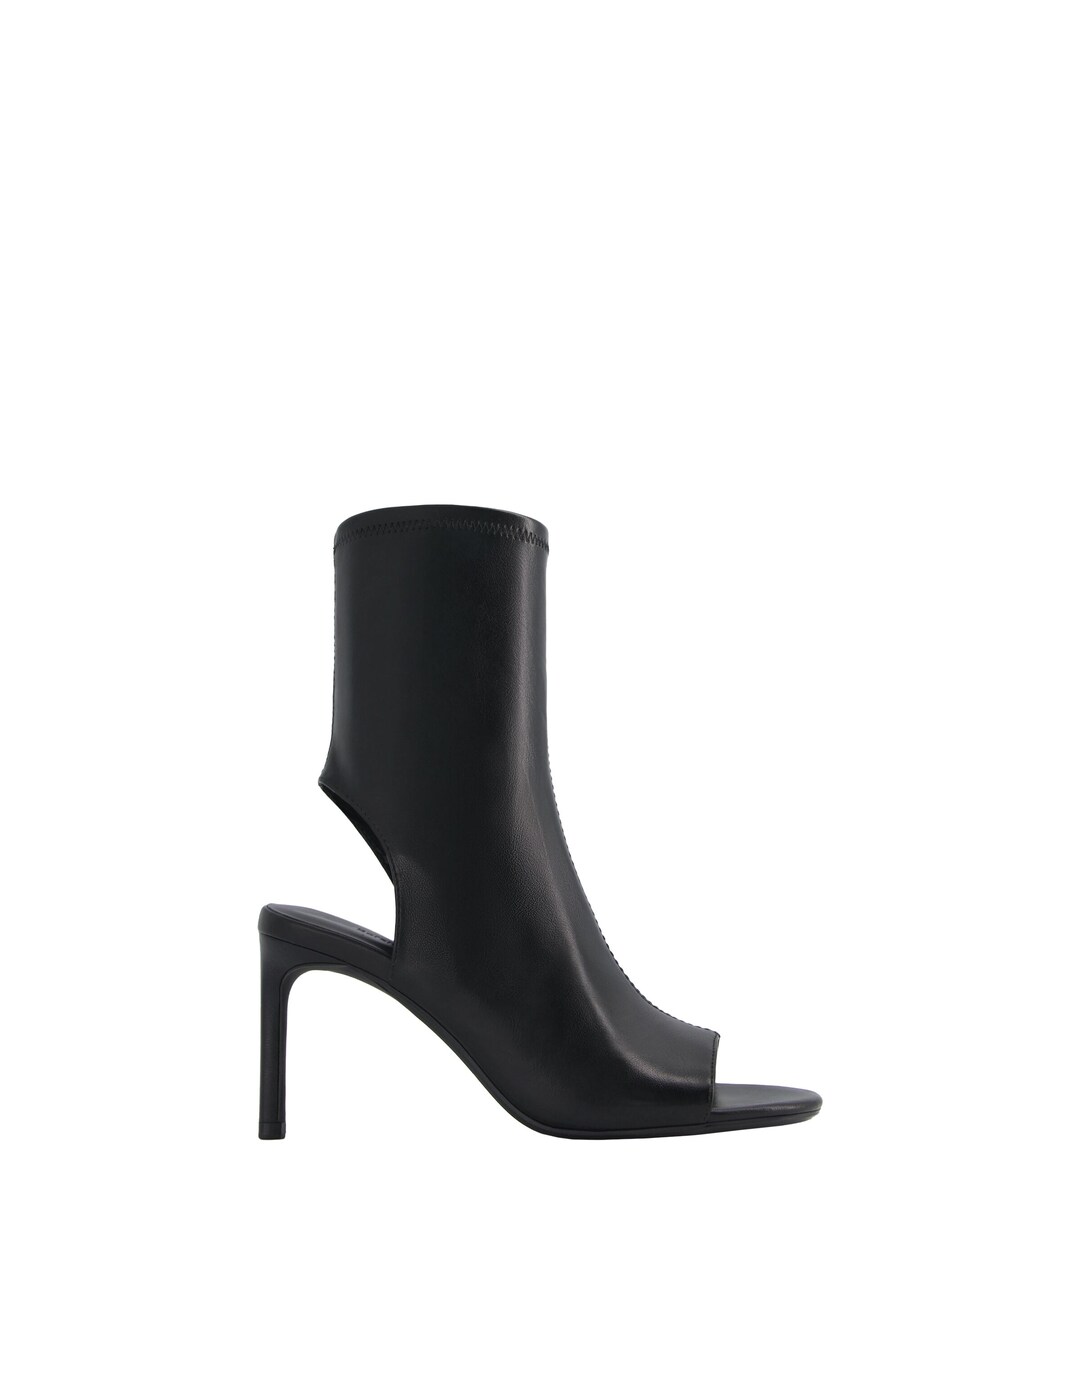 Generation Bershka High-heel slingback ankle boots with a cut-out detail on the toes